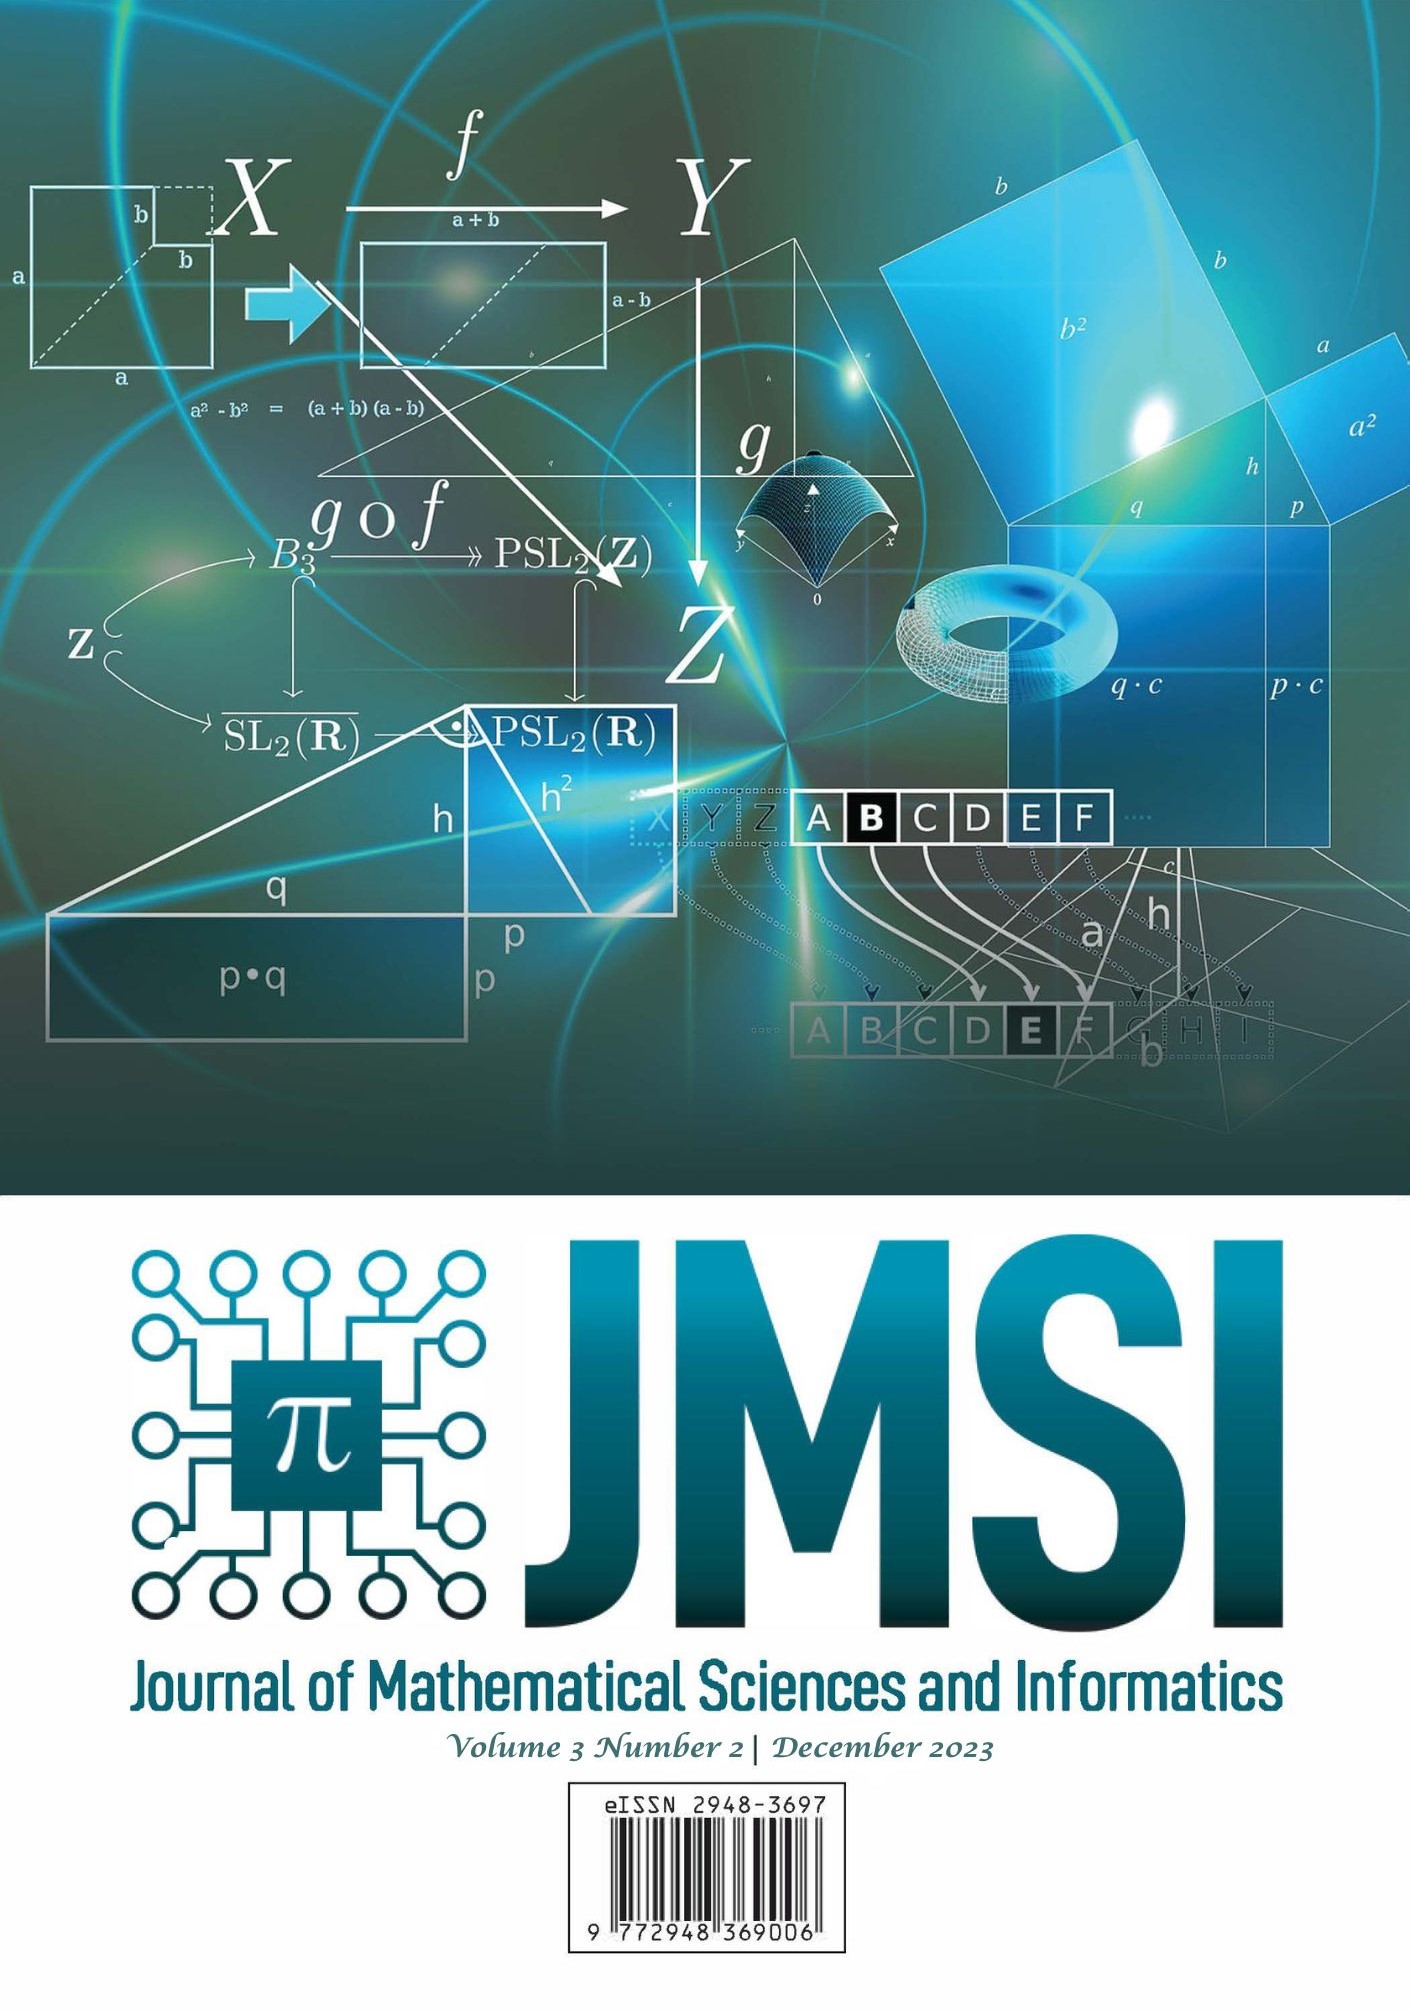 					View Vol. 3 No. 2 (2023): Journal of Mathematical Sciences and Informatics, Volume 3 Issue 2, December 2023 (PRE PRINT)
				